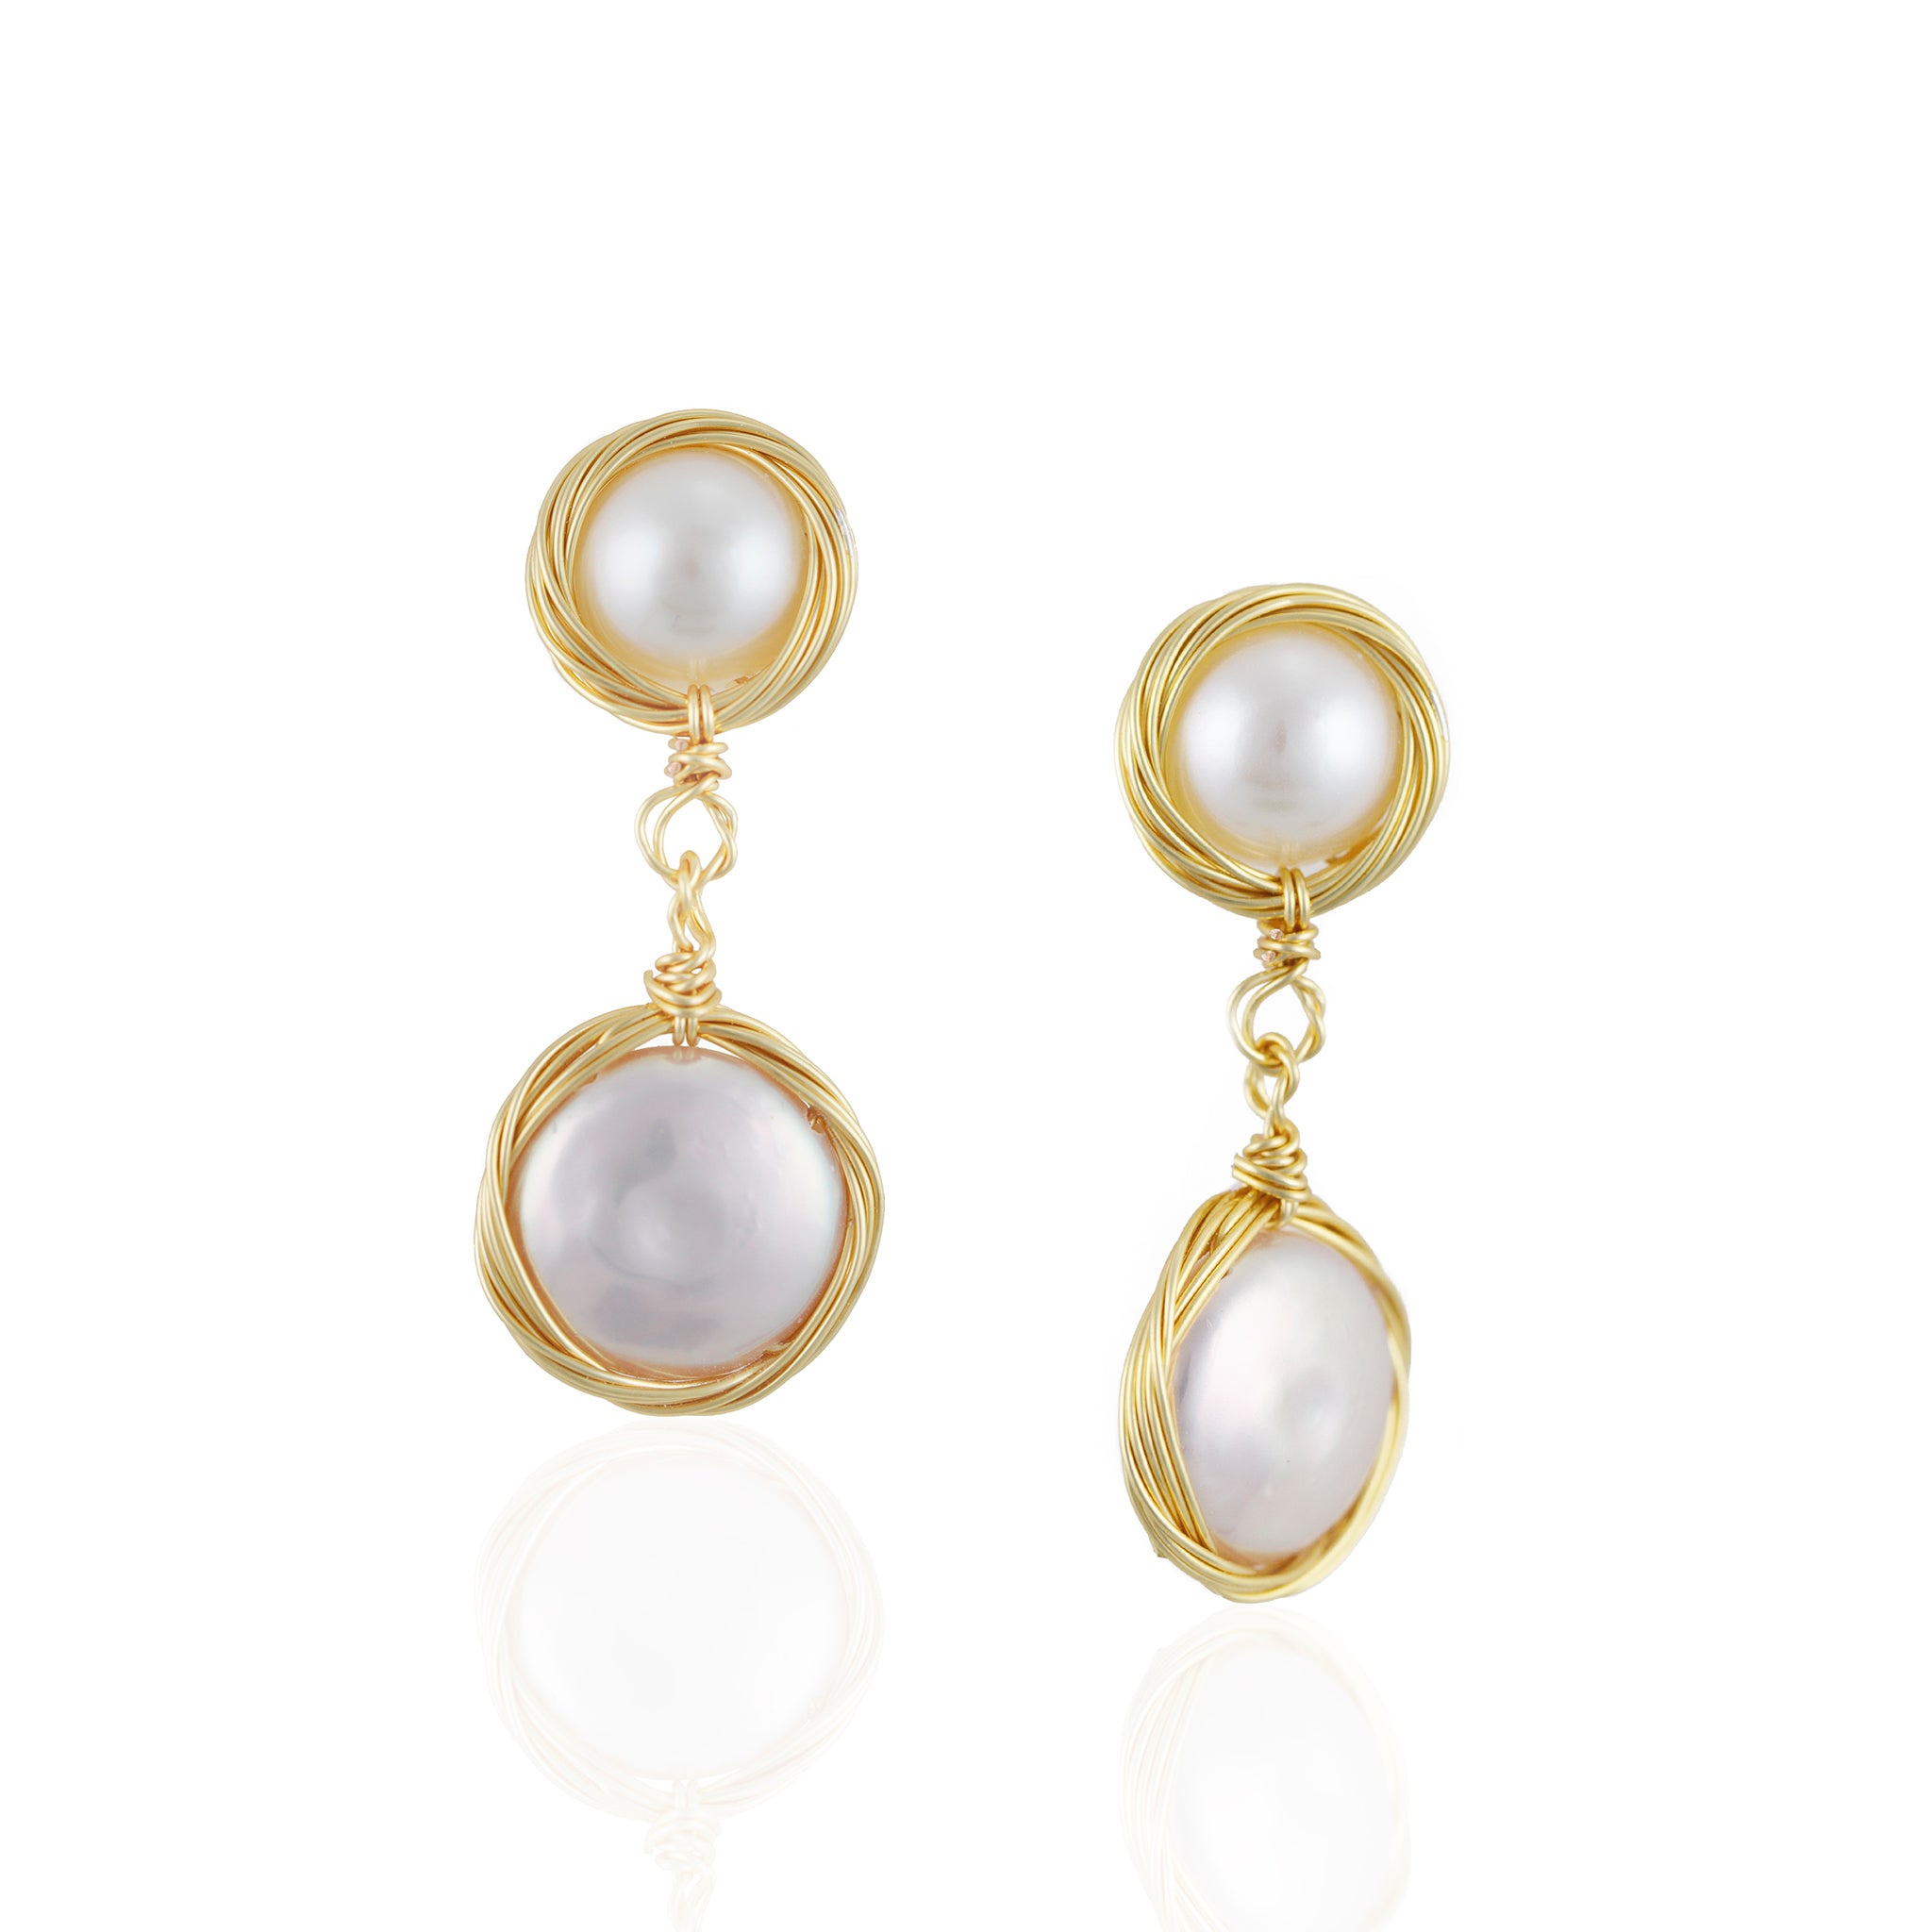 Double Freshwater Pearl Drop Earrings Nested in Woven 14K Gold - L'Amour Pearls